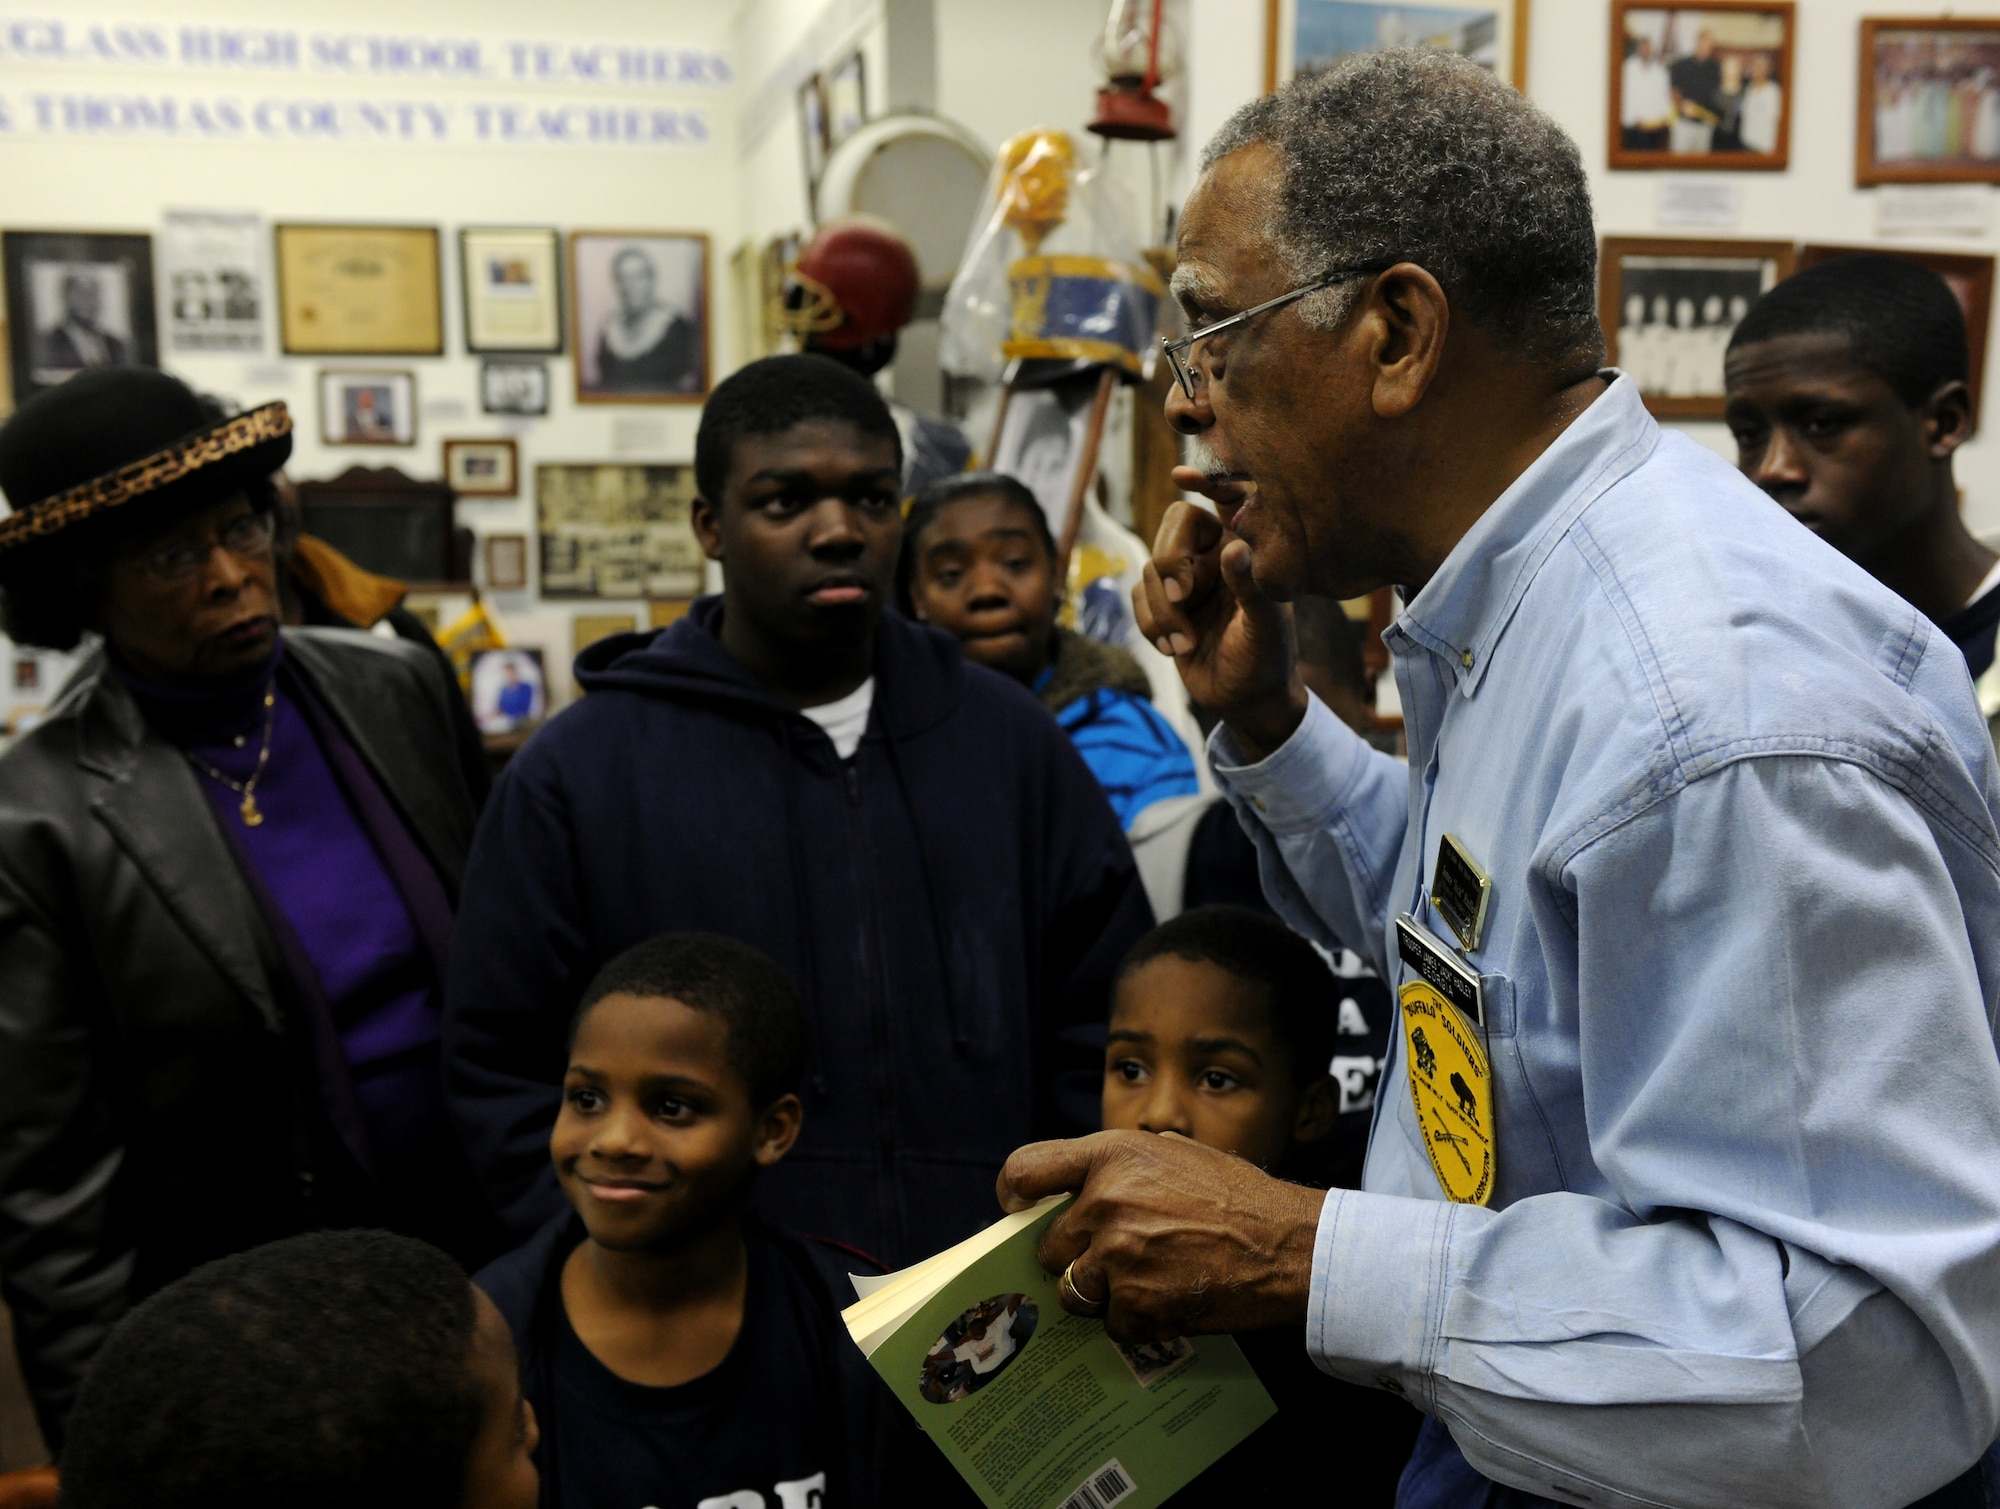 THOMASVILLE, Ga.-- Retired Chief Master Sgt. James “Jack” Hadley gives a brief history lesson to children from the local community during a tour of the Jack Hadley Black History Museum Feb. 12. After retiring from the Air Force, Chief Hadley moved back to his hometown to educate people about African-American history. (U.S. Air Force photo/Airman 1st Class Benjamin Wiseman)(RELEASED)